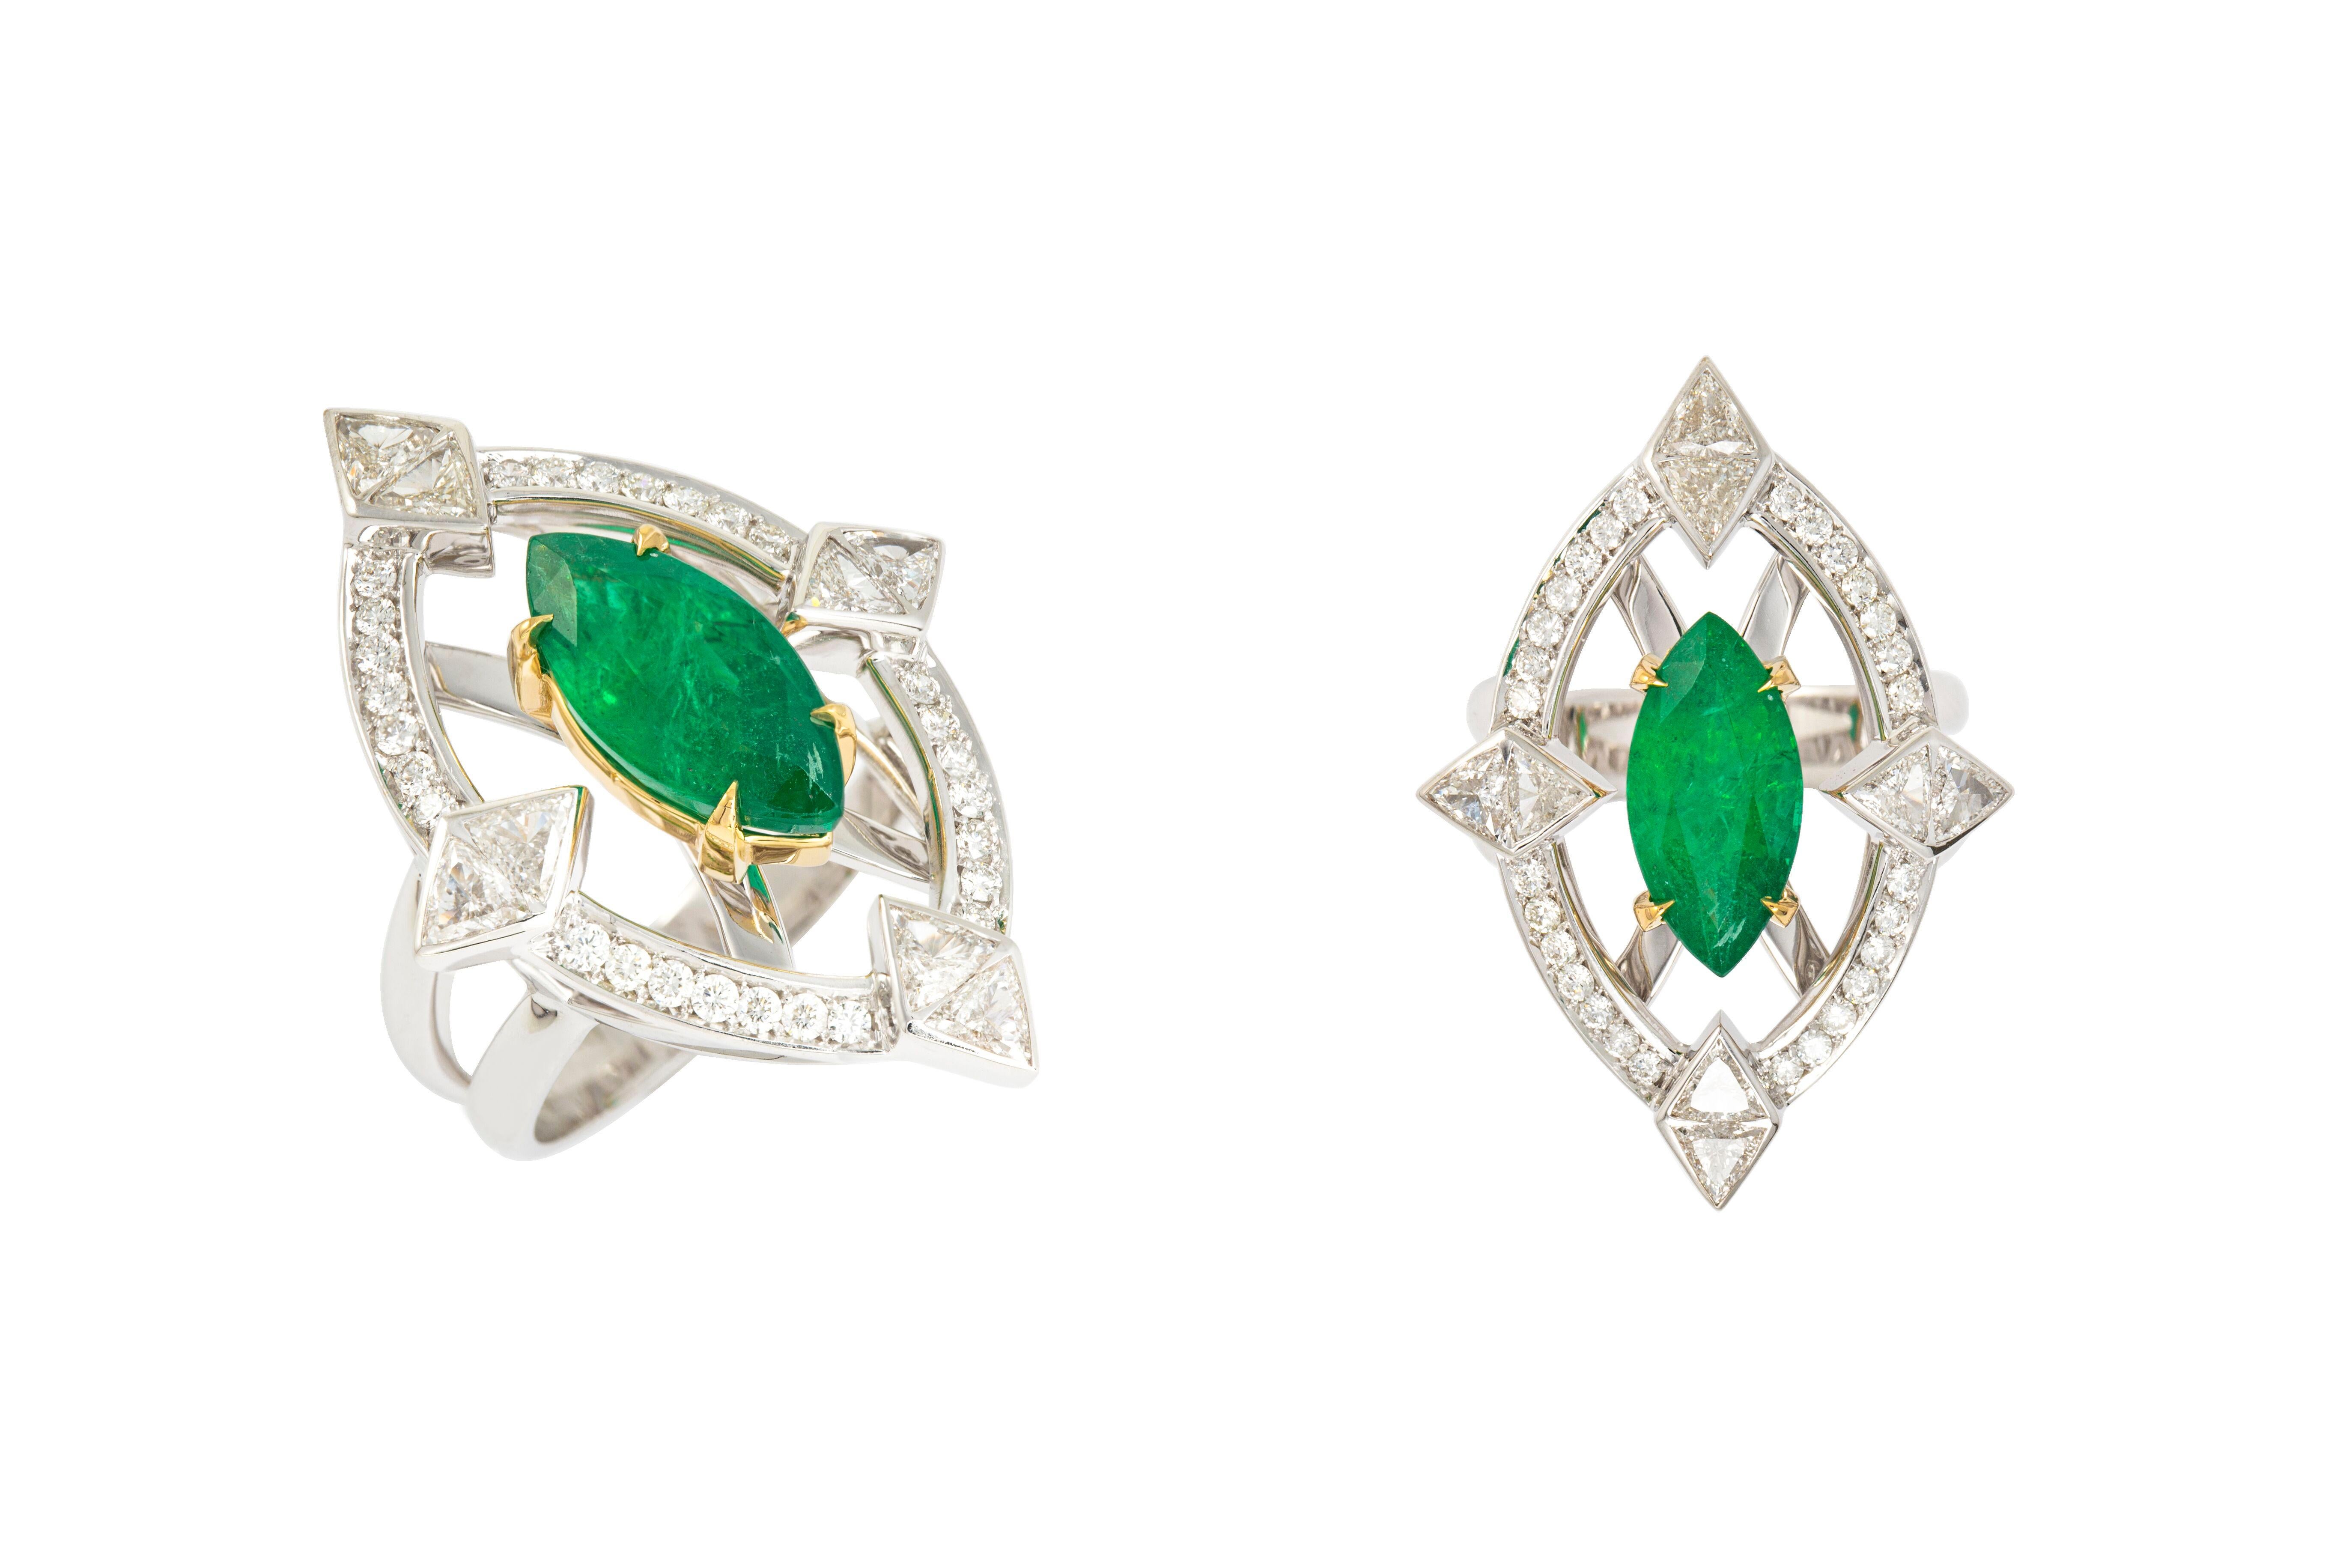 Designed exclusively by Ara Vartanian, this 18k White & Yellow Gold ring features one Emerald in a marquise faceted cut, weighing 3,19ct (three carats and nineteen points), along with eight White Diamonds in trillion brilliant cut, with a total